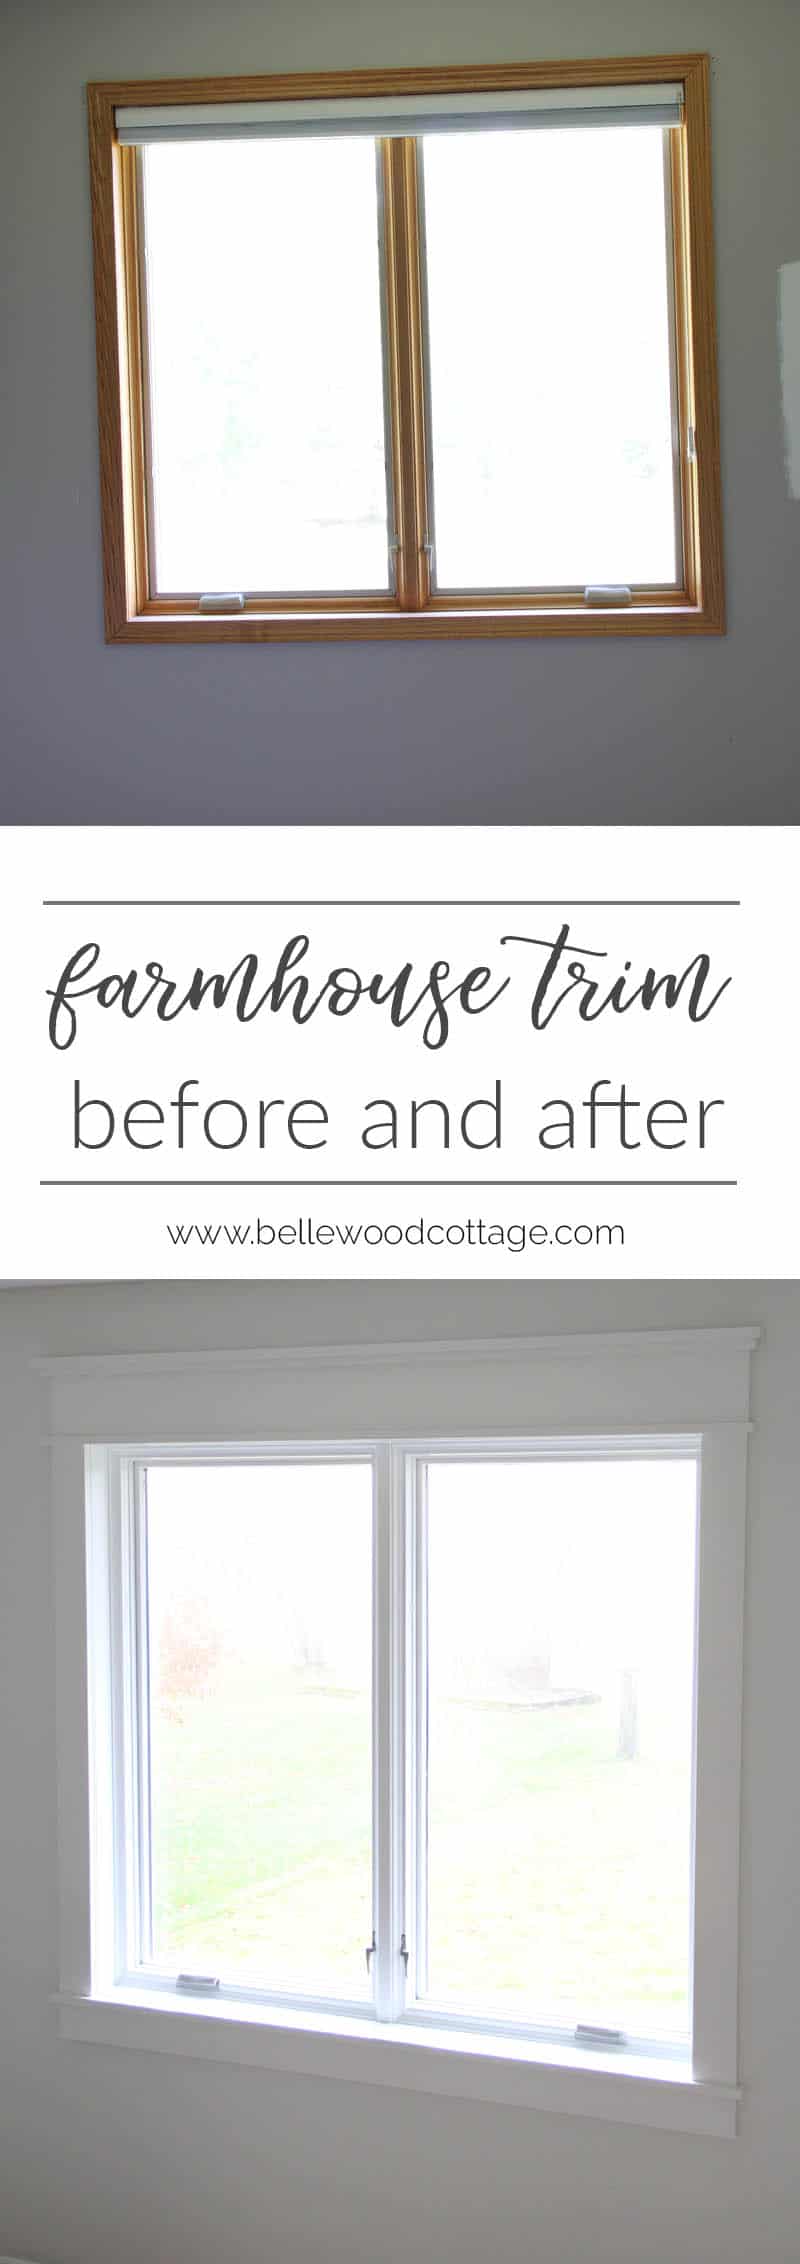 Wondering how to add character to a builder grade home? Learn how to update a boring window with gorgeous (and budget friendly!) farmhouse trim || from Bellewood Cottage ||